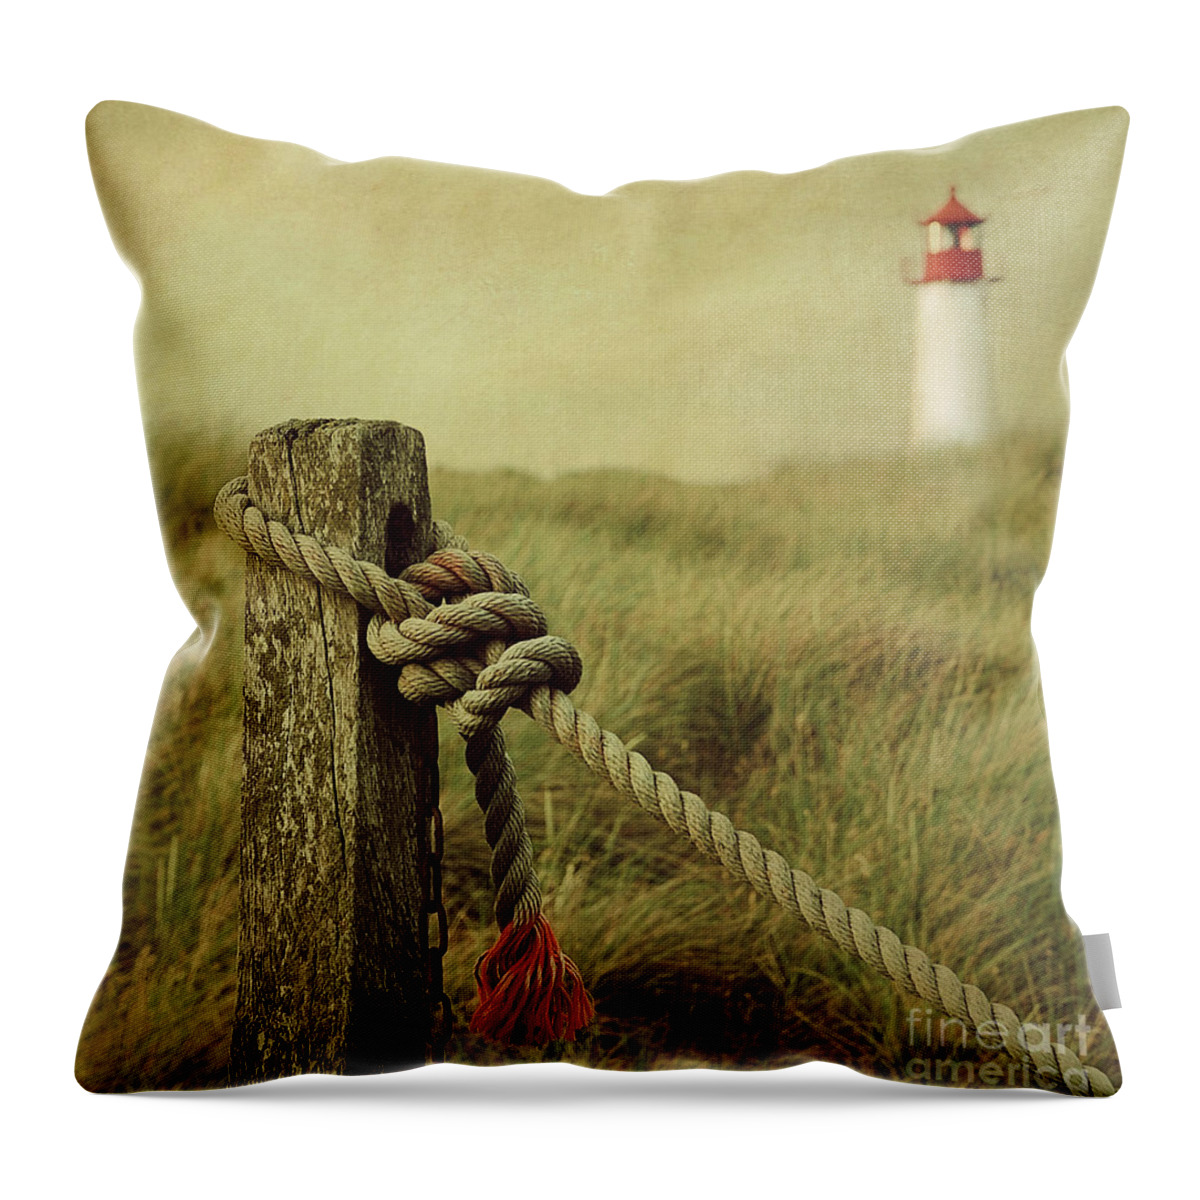 Lighthouse Throw Pillow featuring the photograph To The Lighthouse by Hannes Cmarits